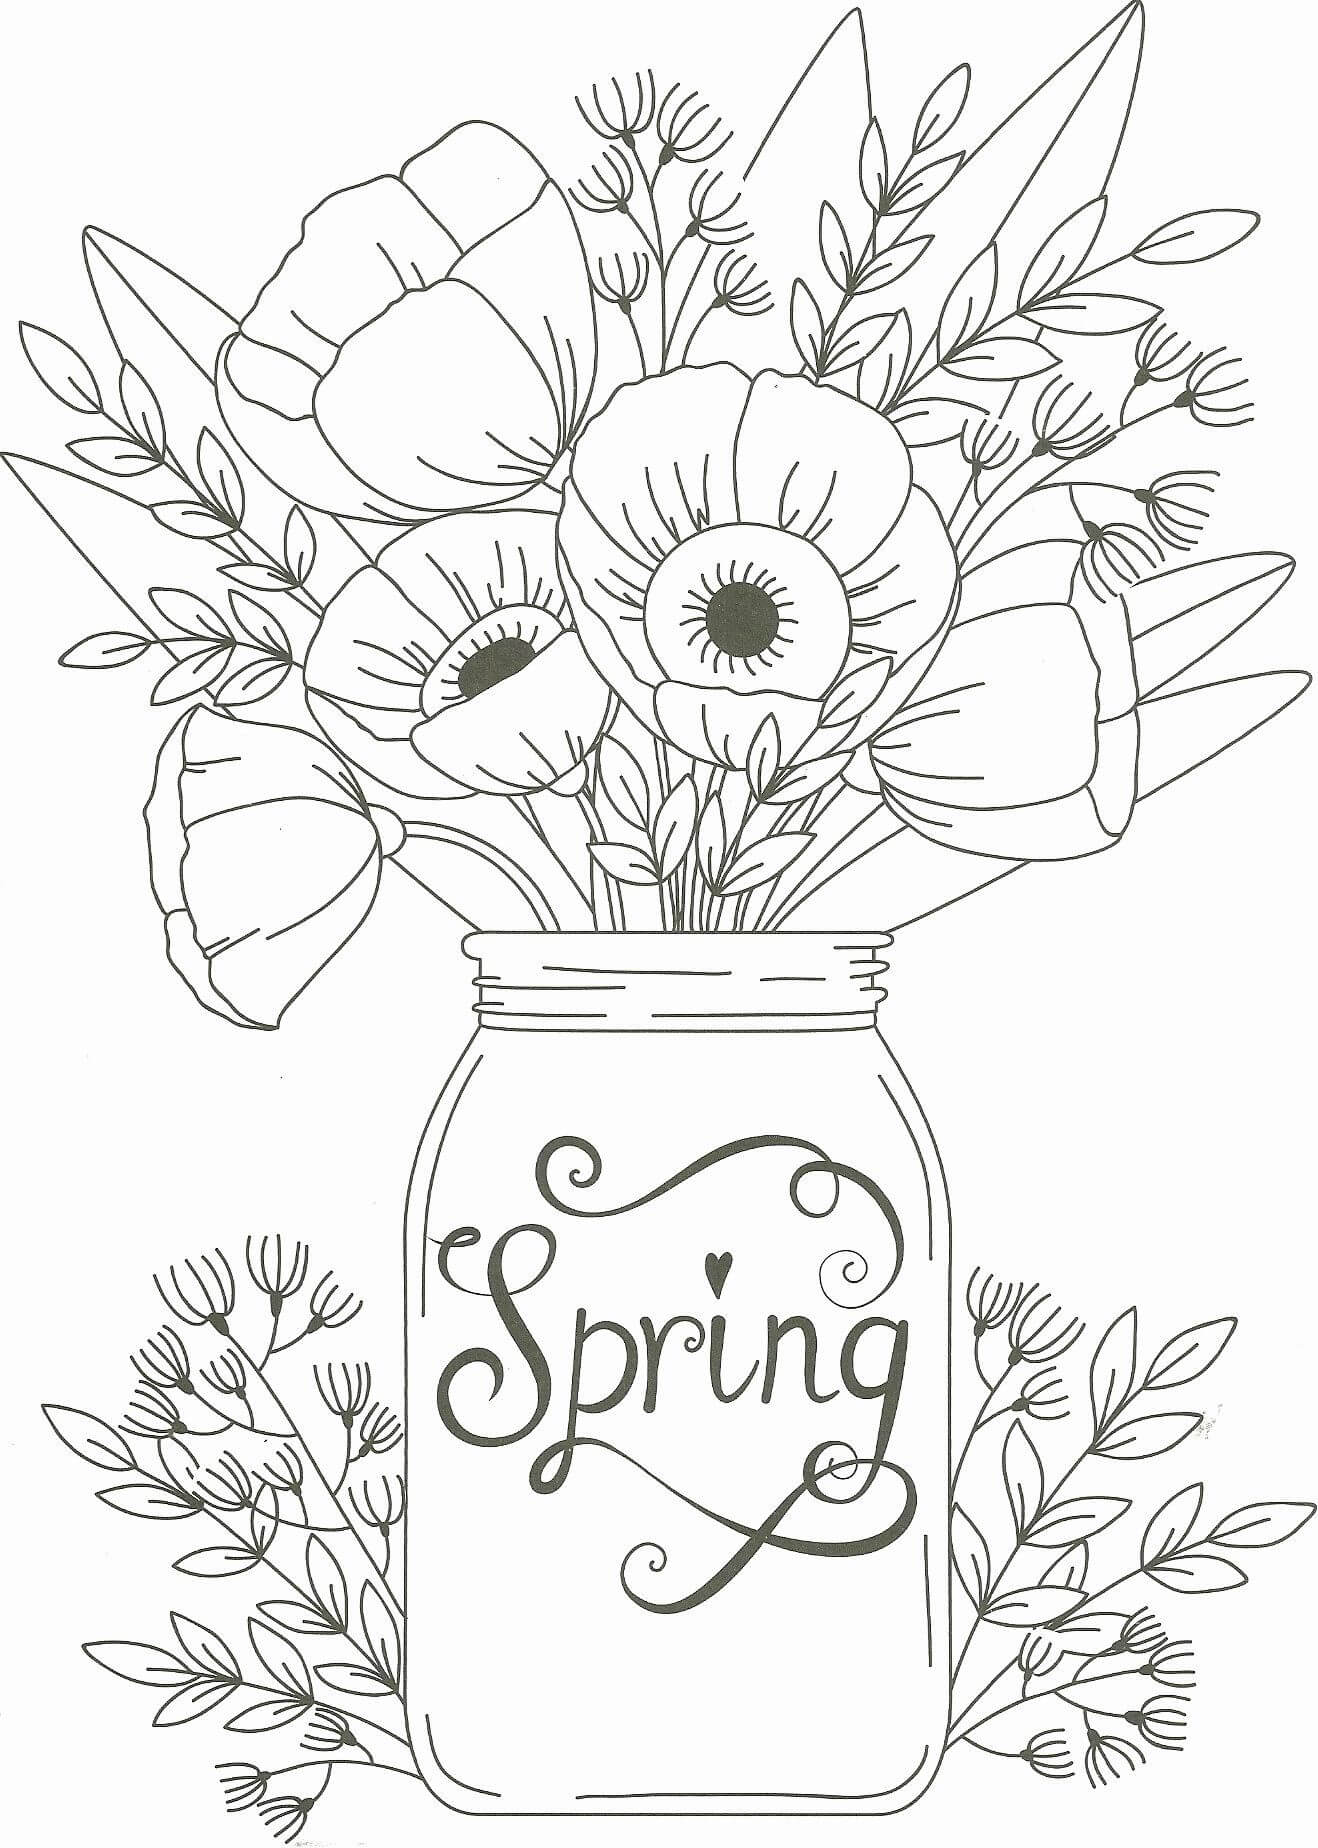 spring coloring pages to print | spring coloring pages printable pdf | spring coloring pages easy